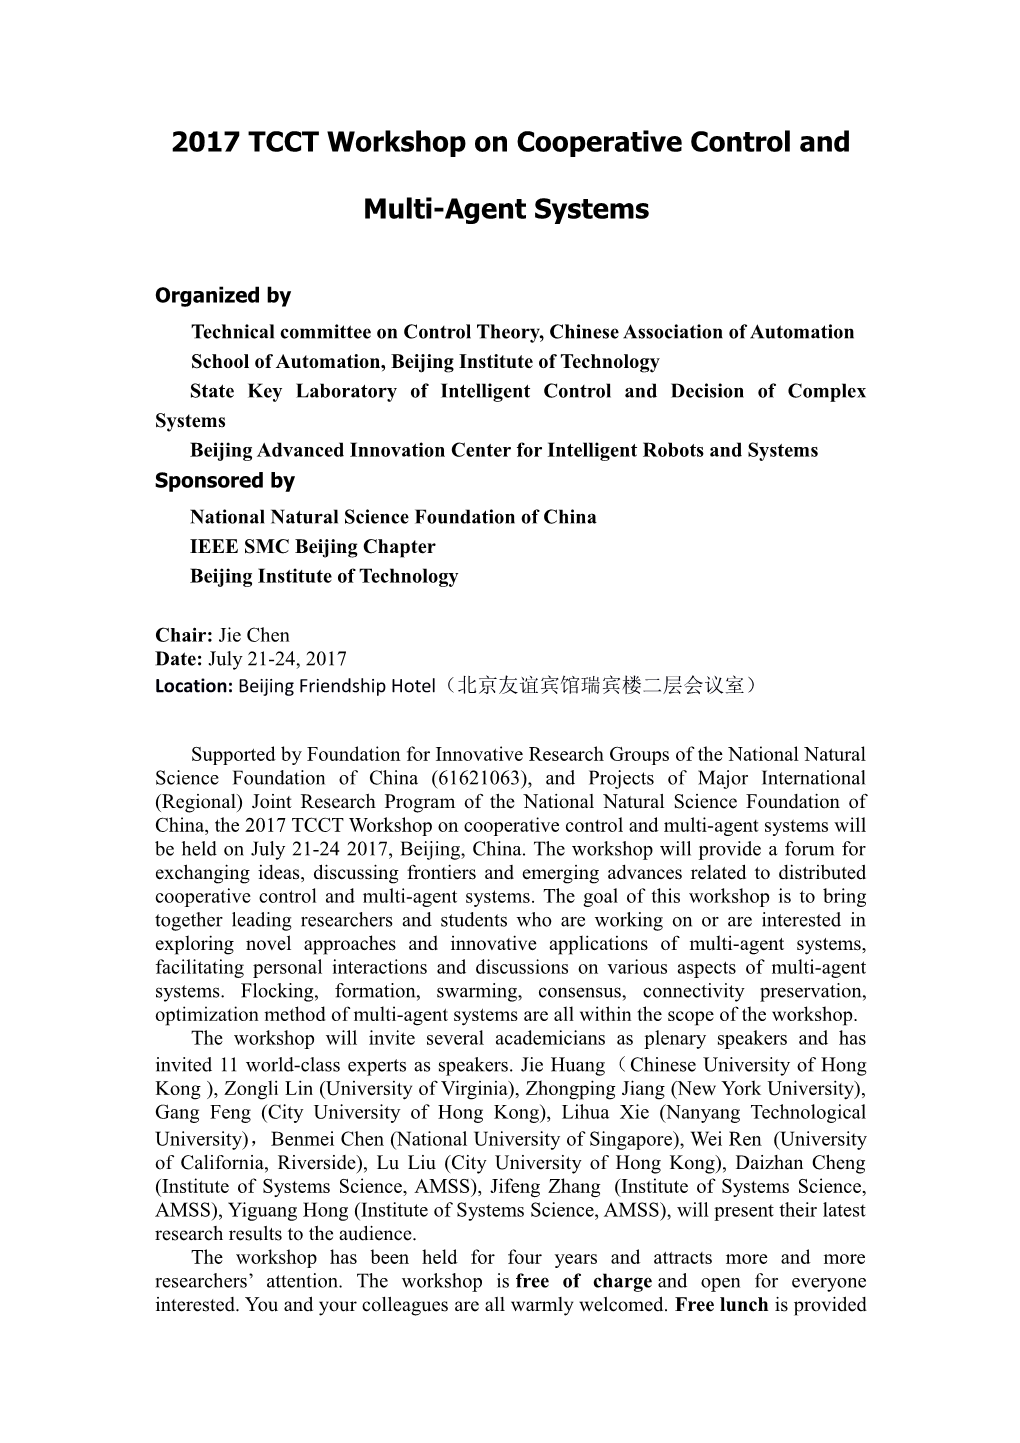 Technical Committee on Control Theory, Chinese Association of Automation